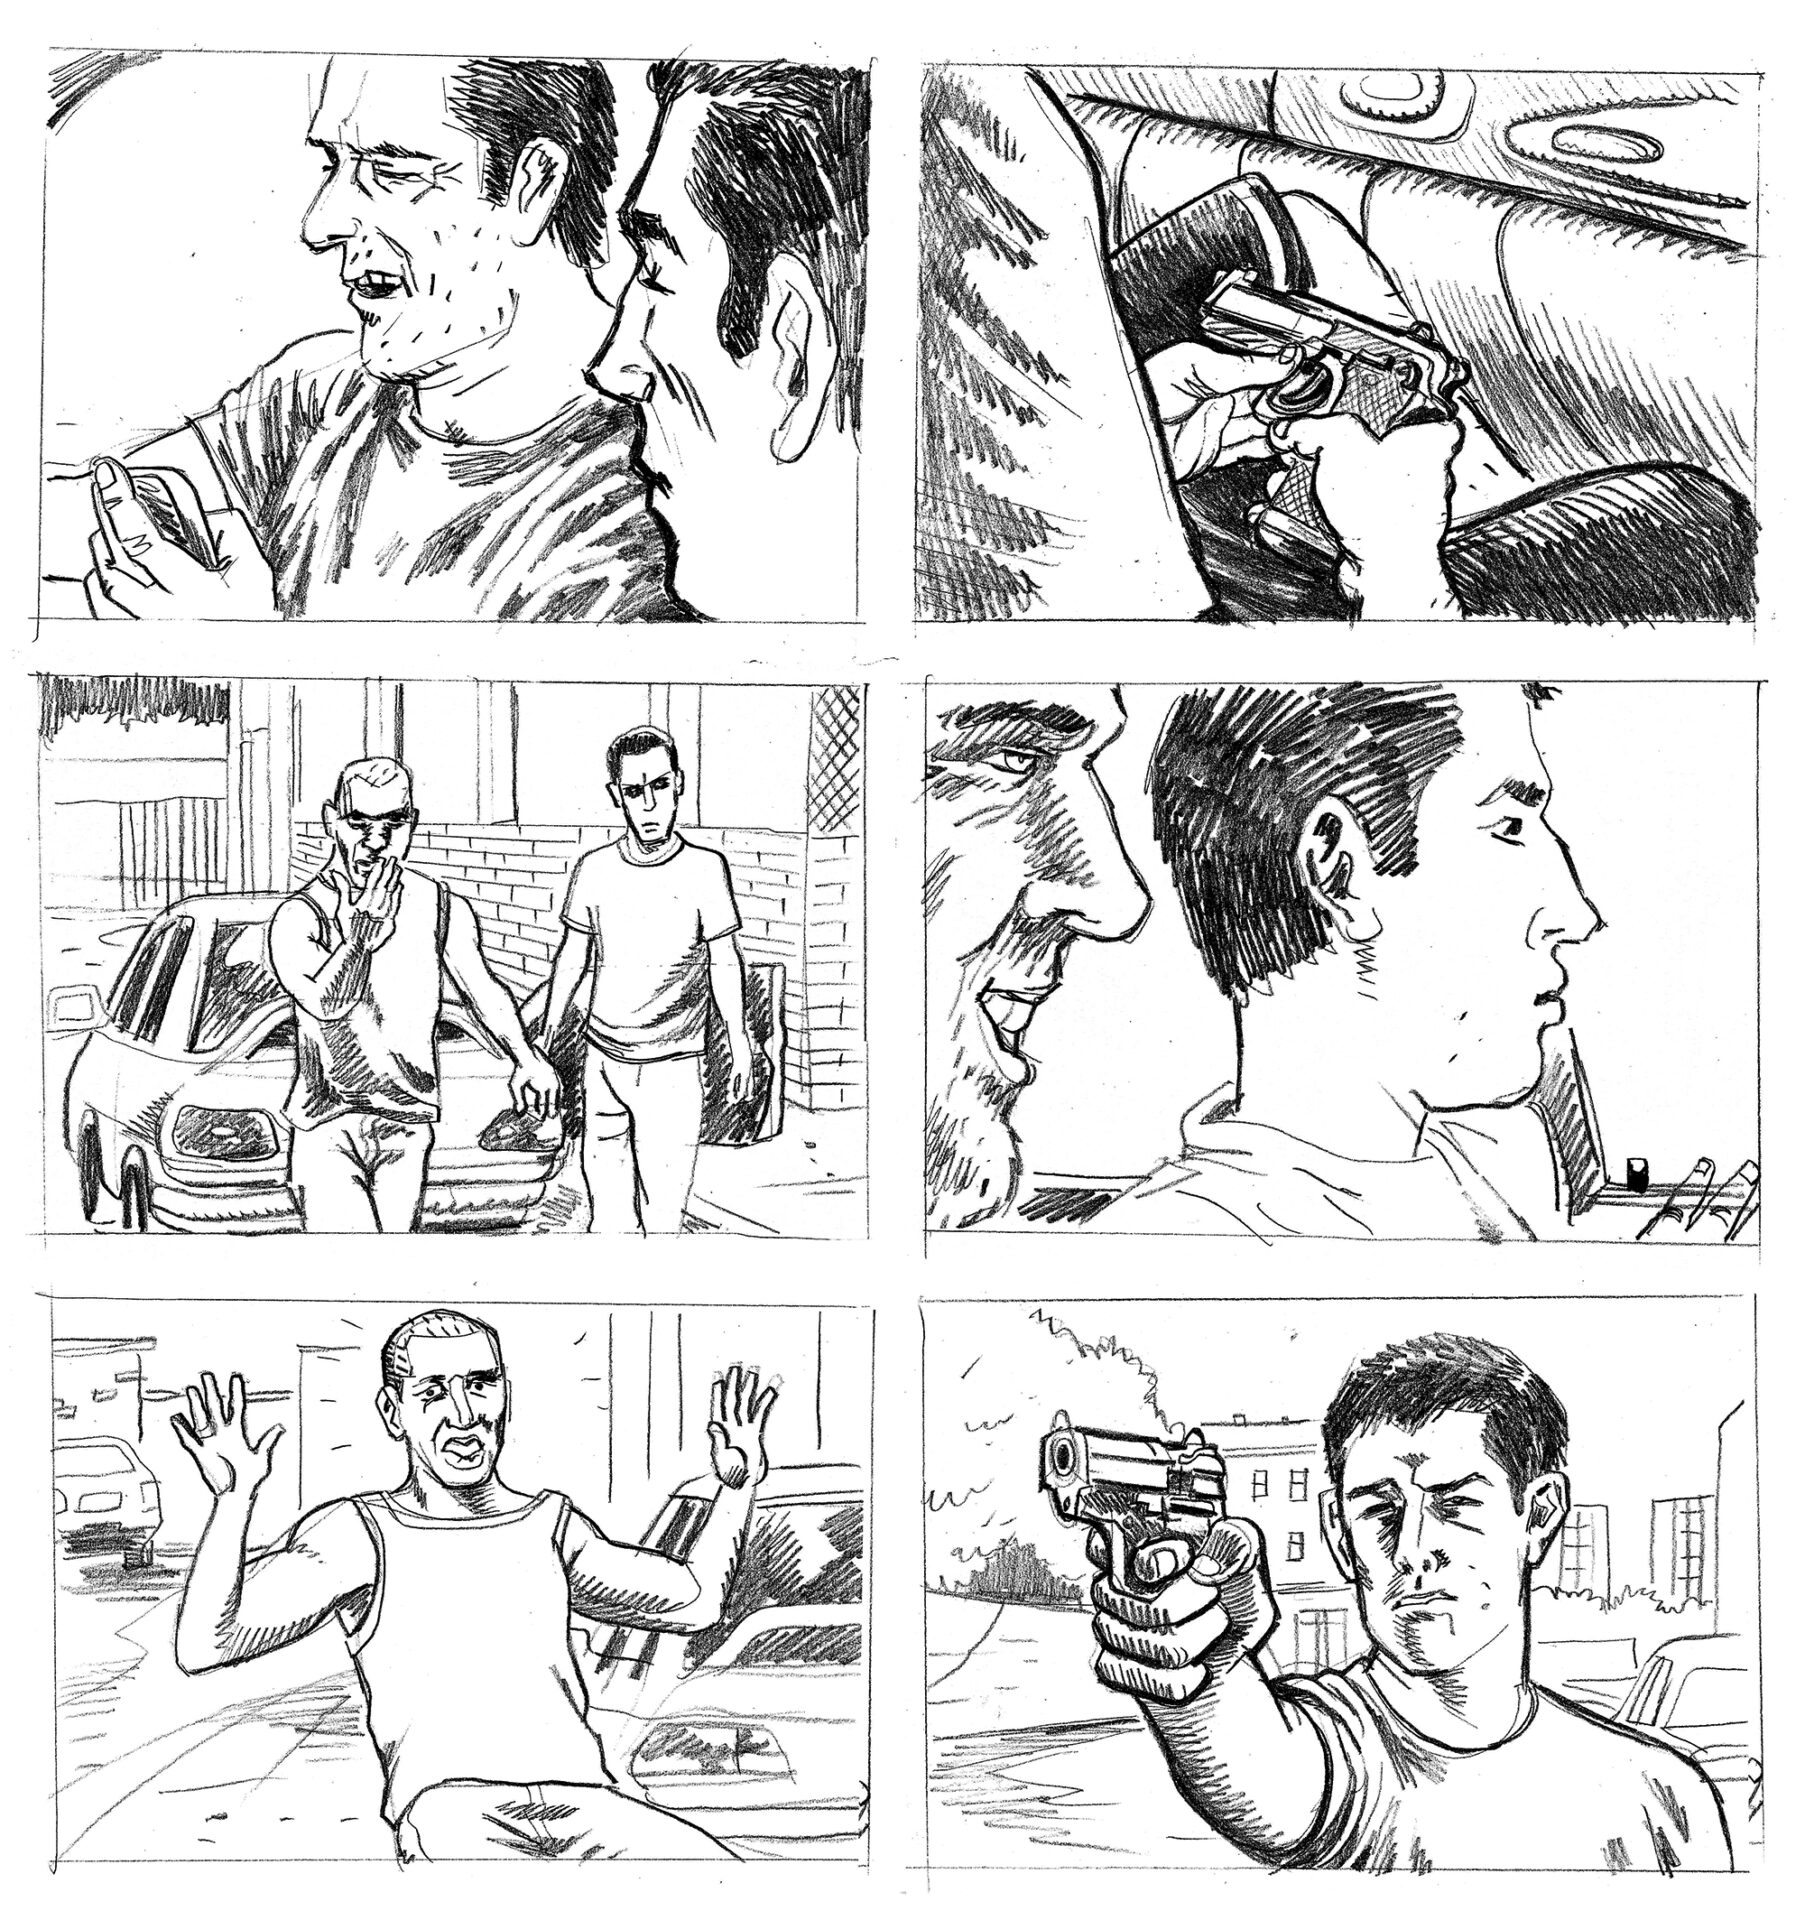 Storyboard for movies